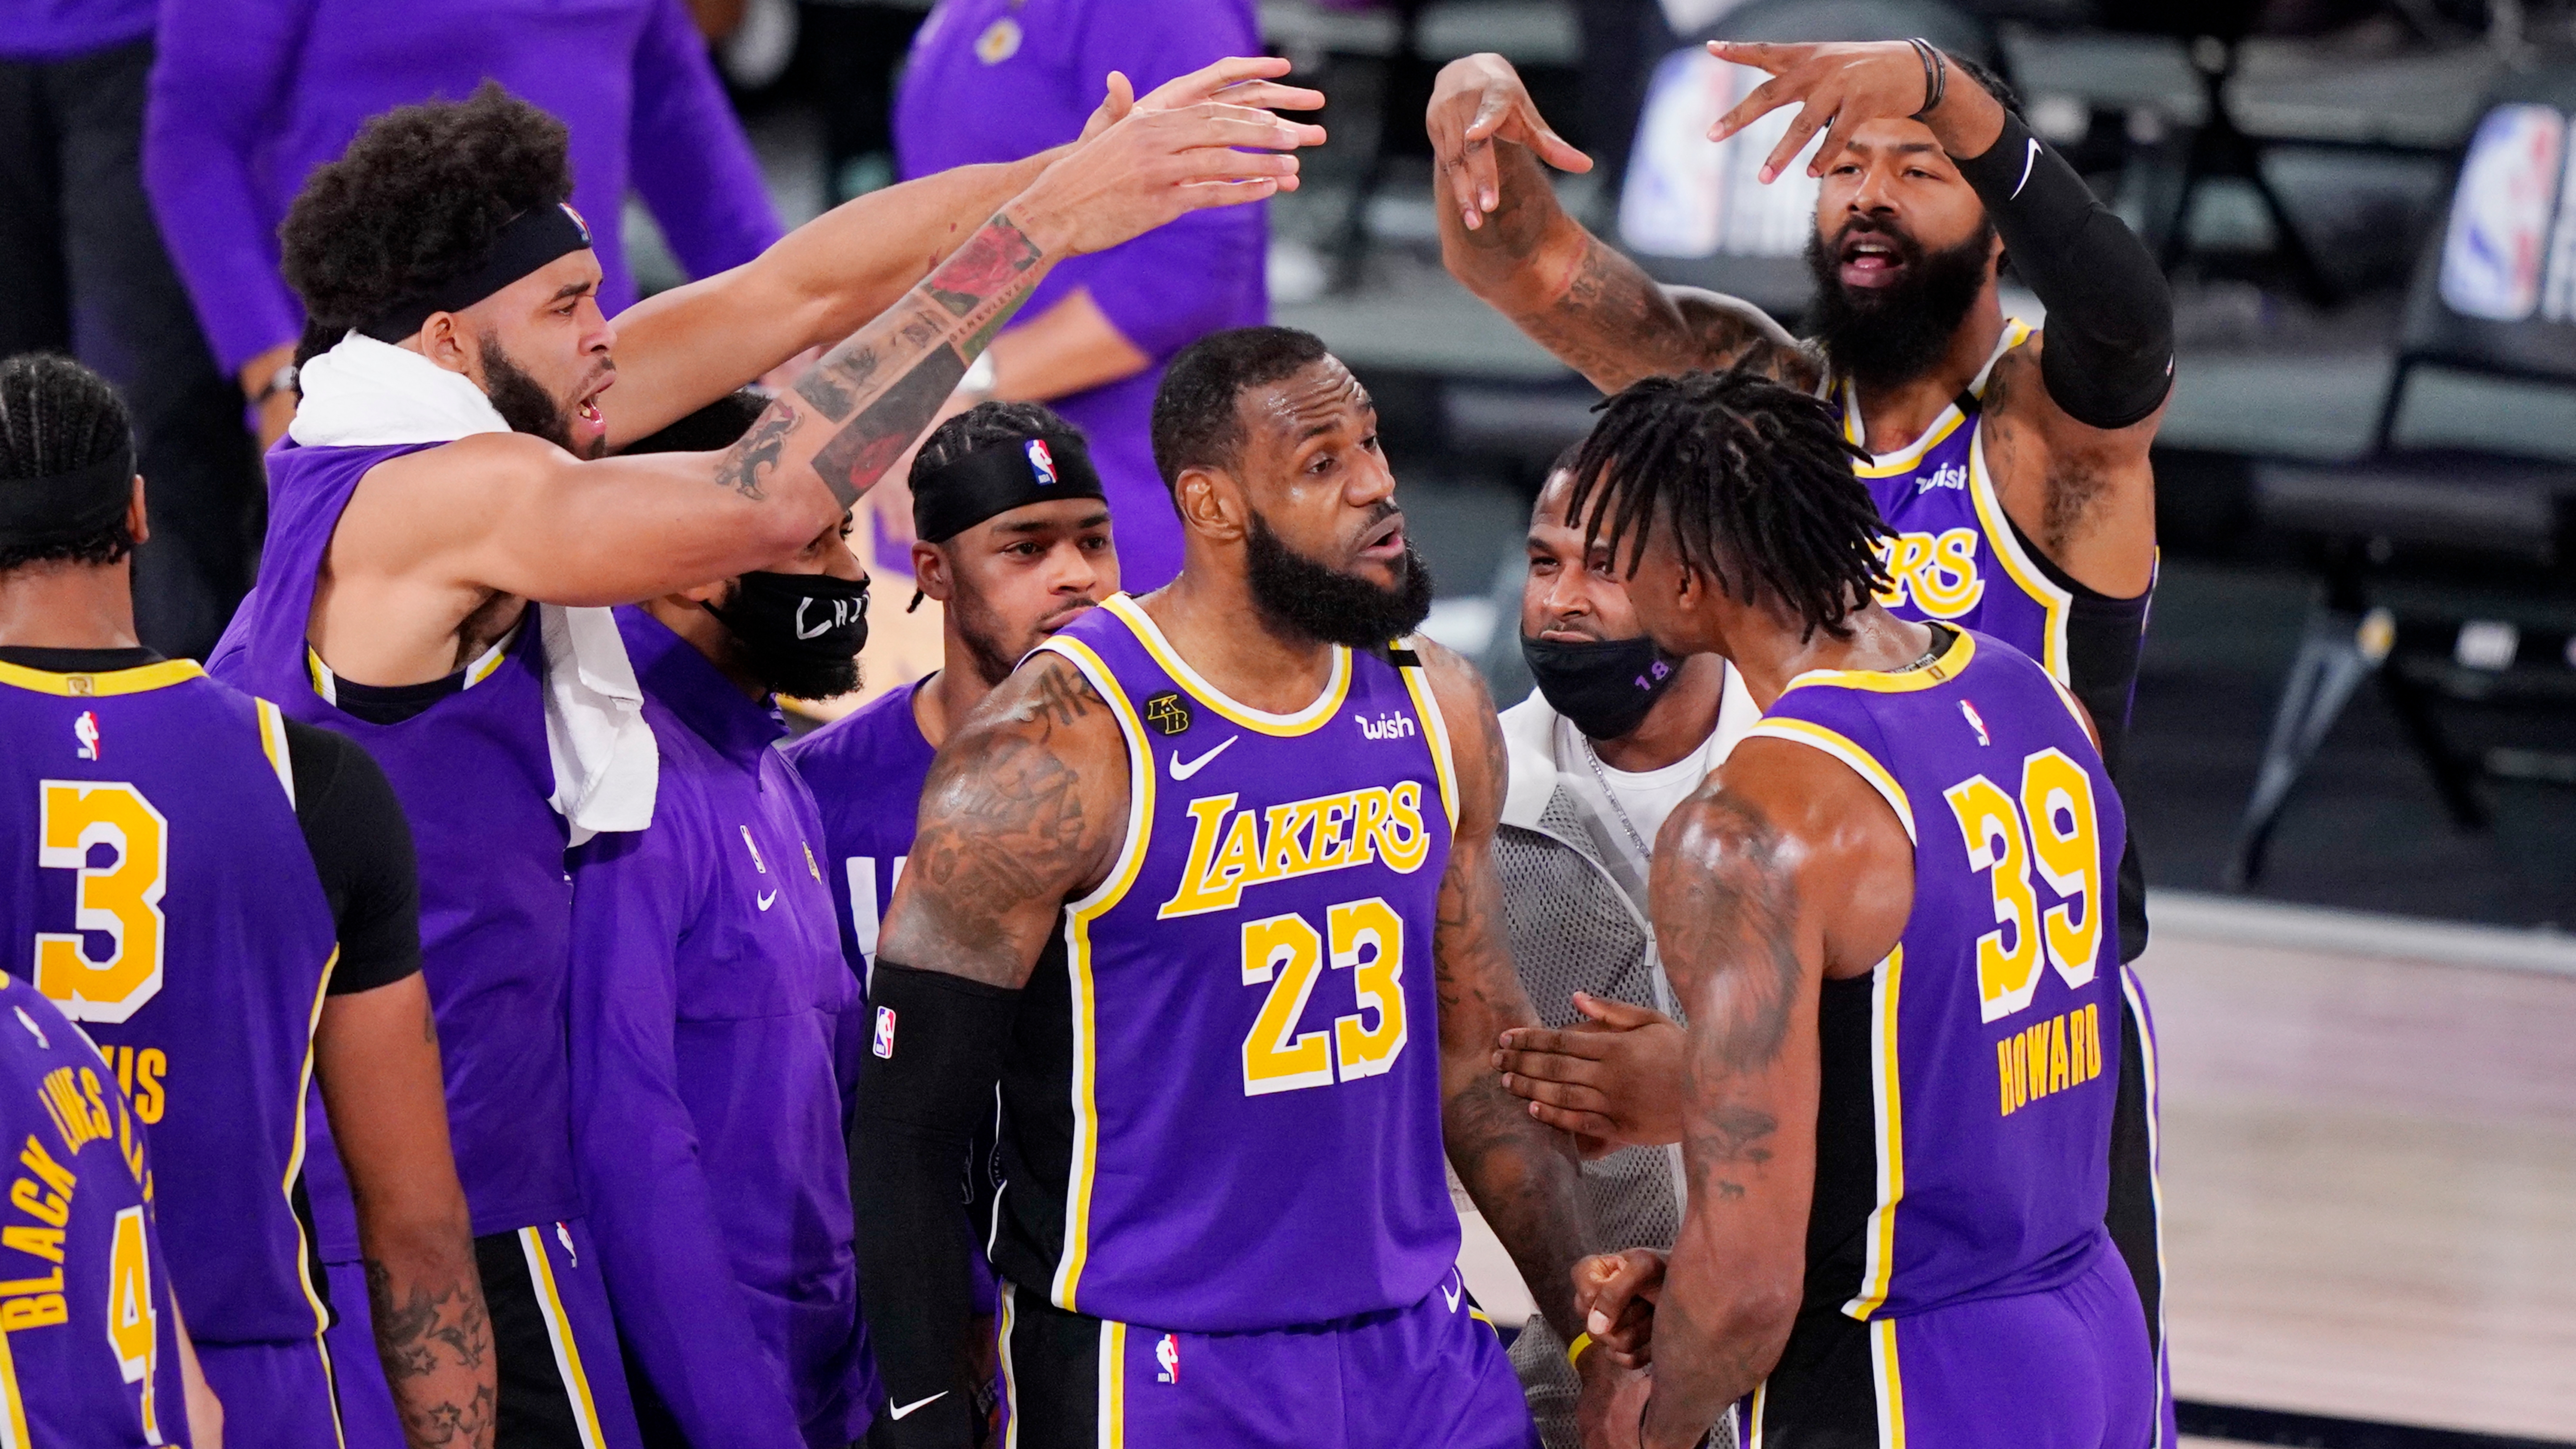 2020 NBA Finals Preview: LeBron faces former squad, rebuilt in his wake